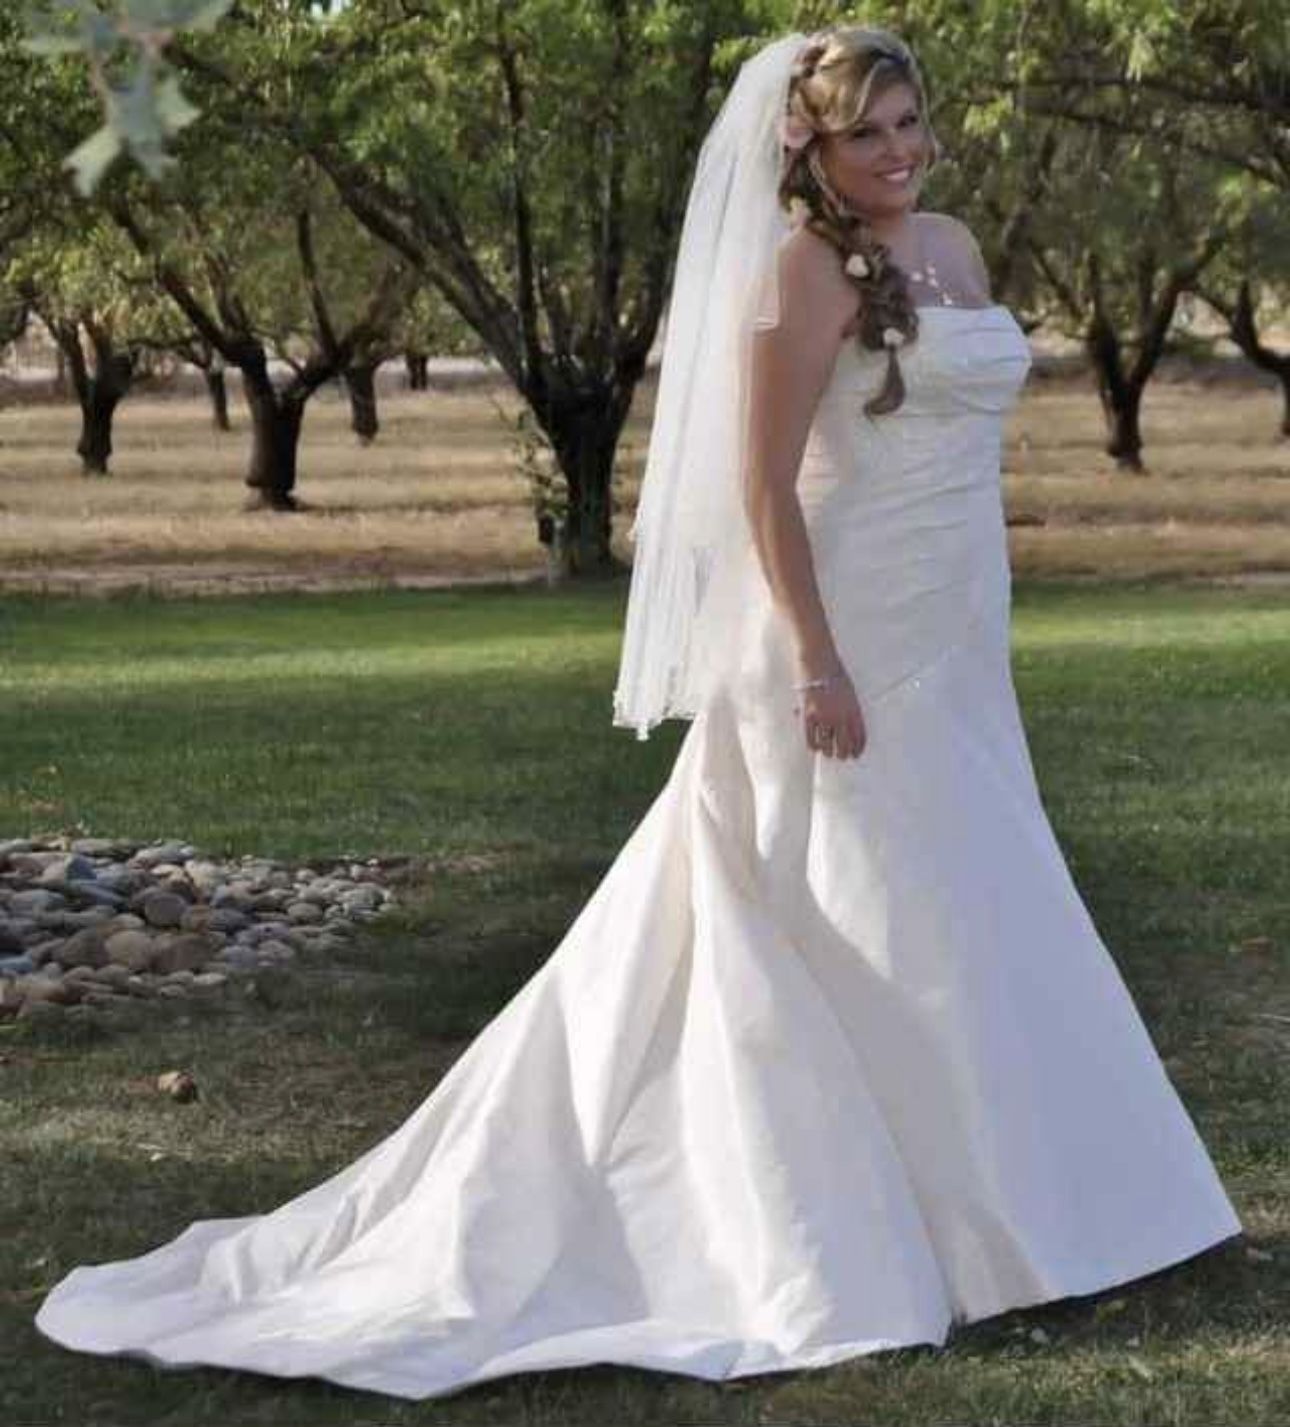 Wedding Dress Sz 12 With Veil Local Pickup CASH ONLY